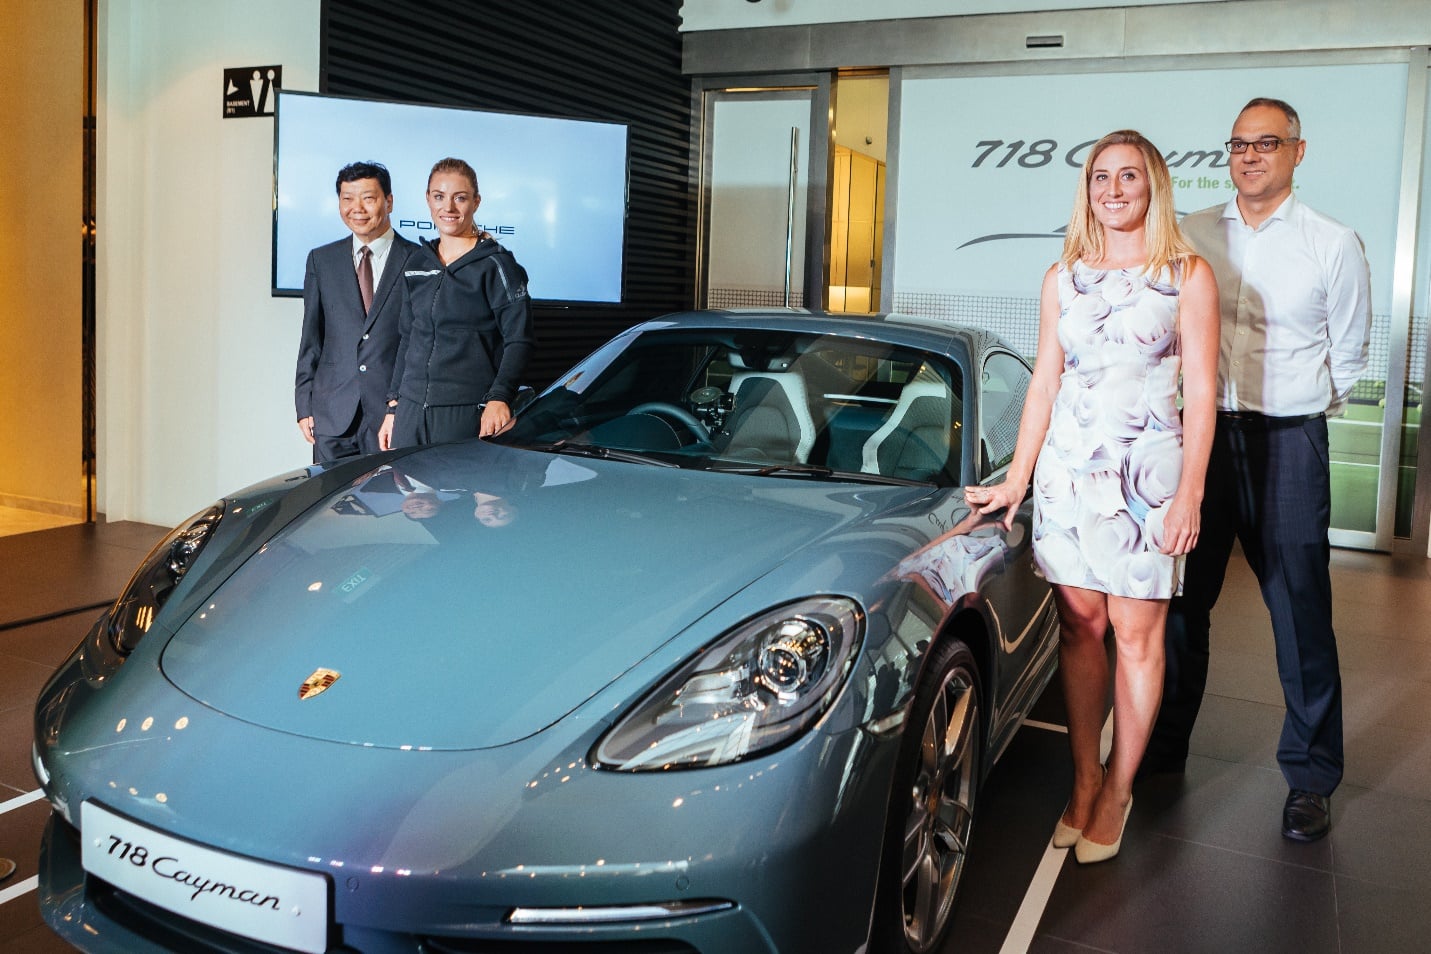 From left to right - Francis Lee, Managing Director of Stuttgart Auto; Angelique Kerber; Melissa Pine, Vice-President of WTA Asia-Pacific and Tournament Director of the WTA Finals, and Henrik Dreier, General Manager, Porsche Singapore.